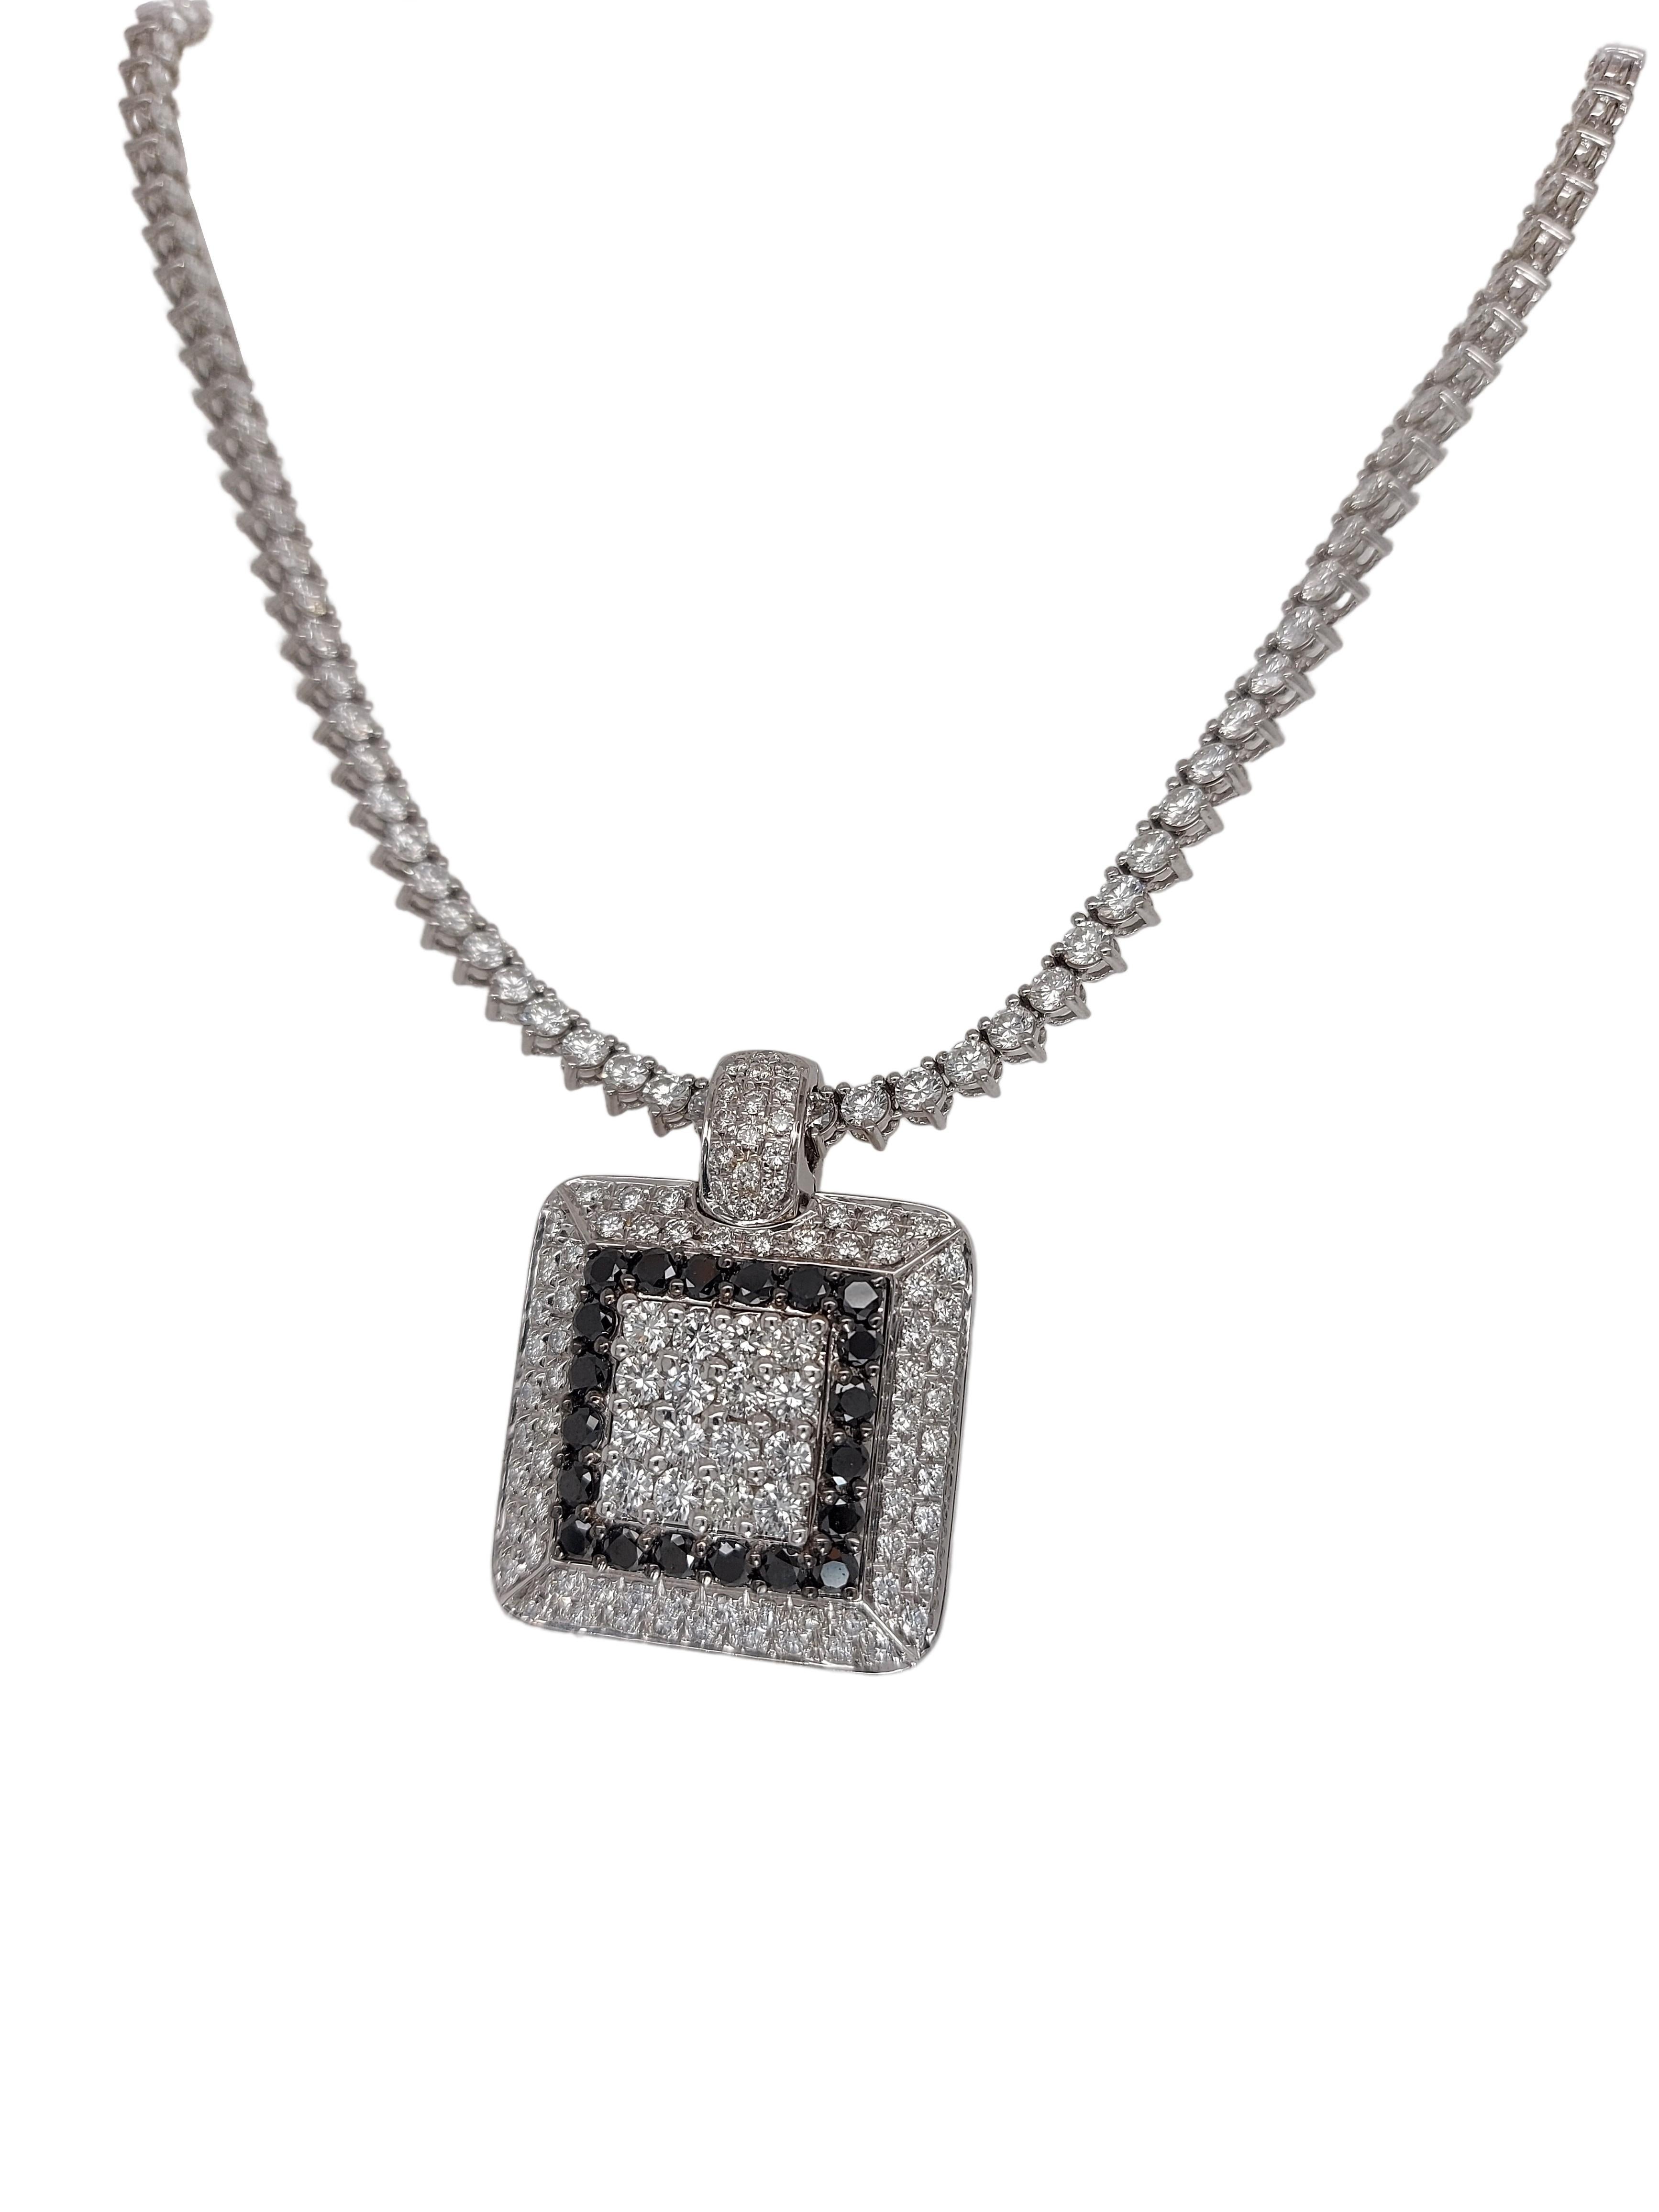 Magnificent Leo Pizzo 18kt white Gold Necklace with 12.04ct Black and White Diamonds.

Comes with a beautiful 18kt white gold chain adorned with diamonds, chain length 40 cm

Diamonds: Together approx. 12.04 ct brilliant cut diamonds

Material: 18kt